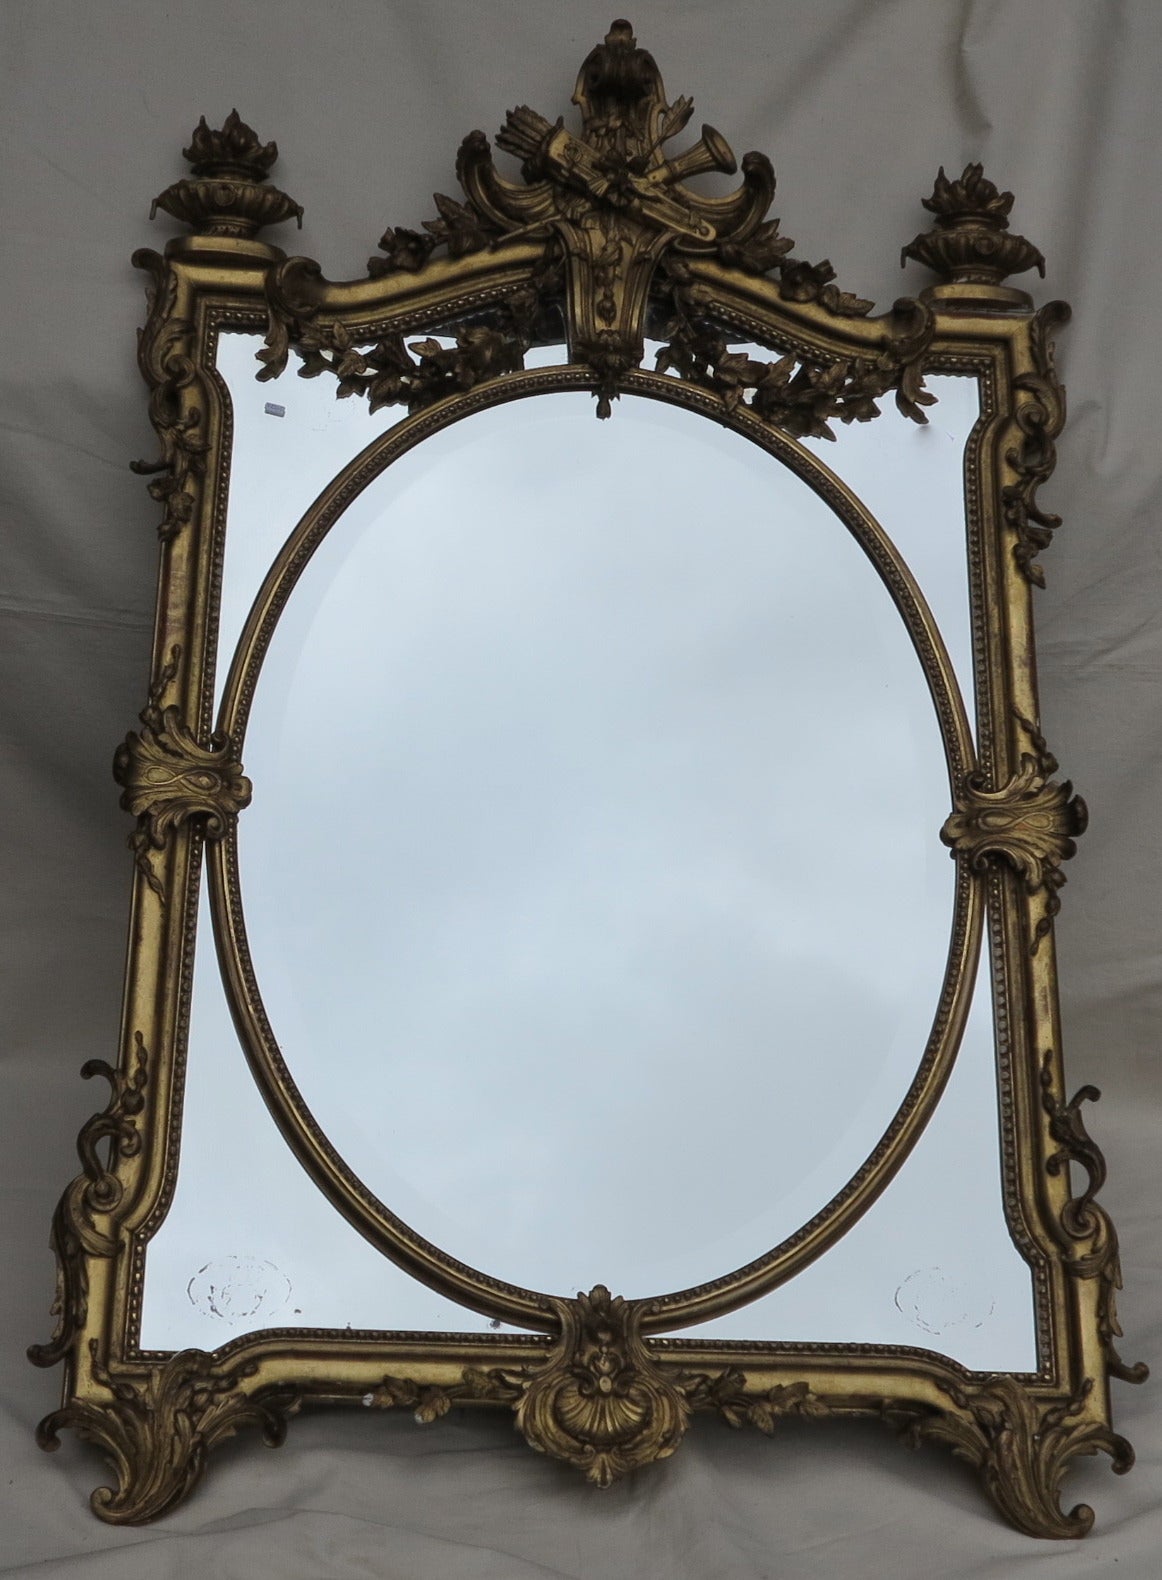 Mirror in wood and golden stucco has parecloses beveled in oval mirror center circa N3 , gilt original sheet of gold,good condition